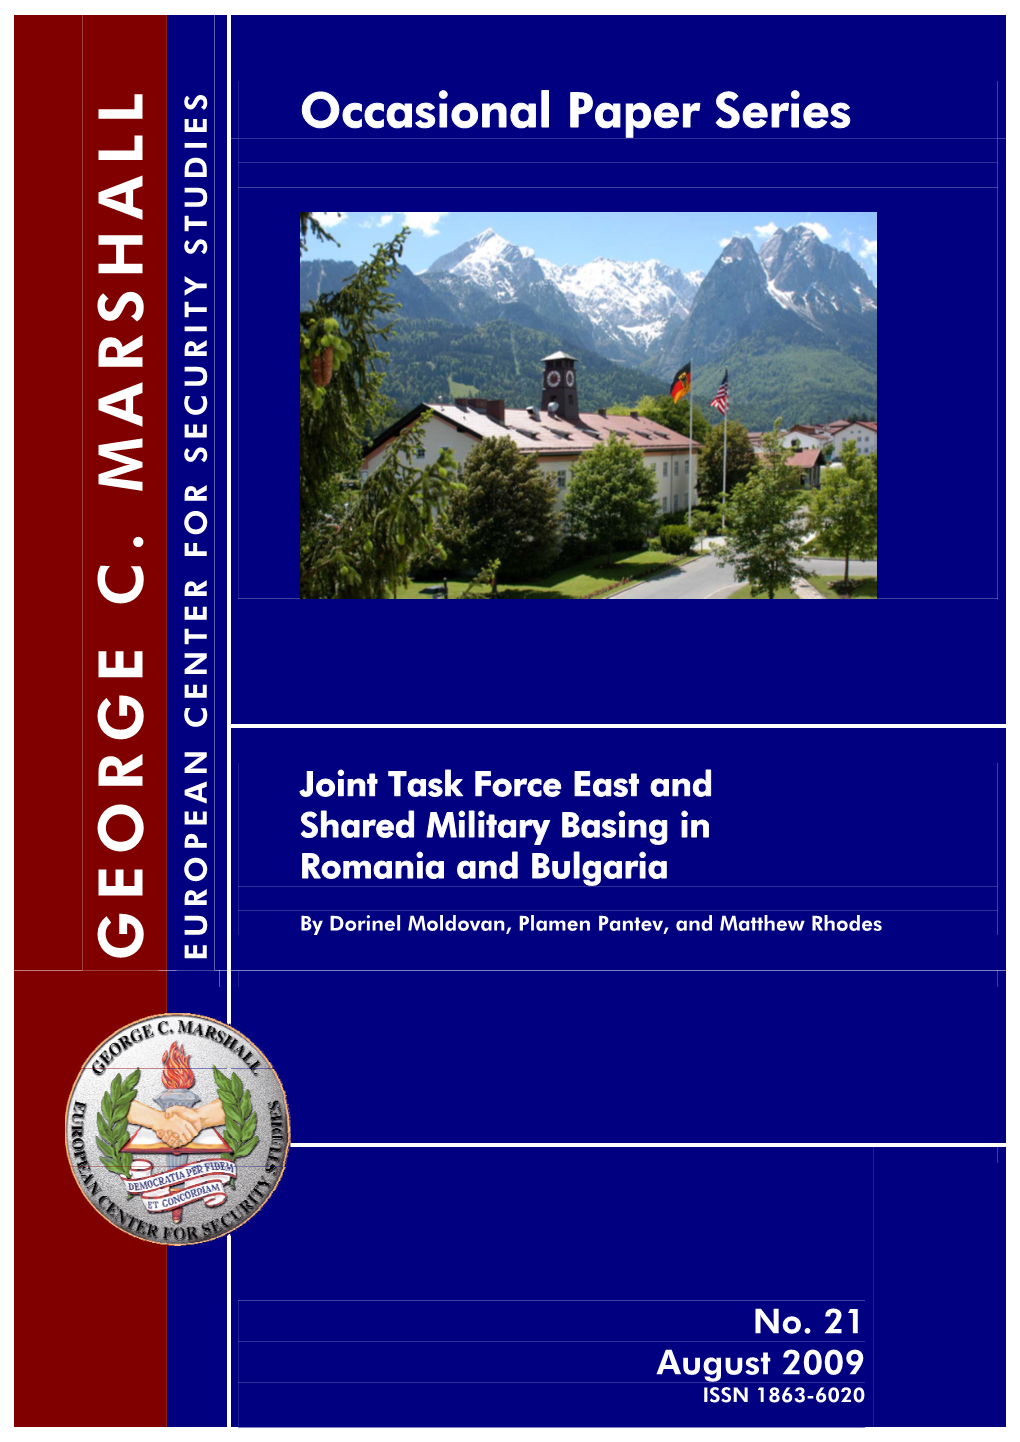 Joint Task Force East and Shared Military Basing in Romania and Bulgaria